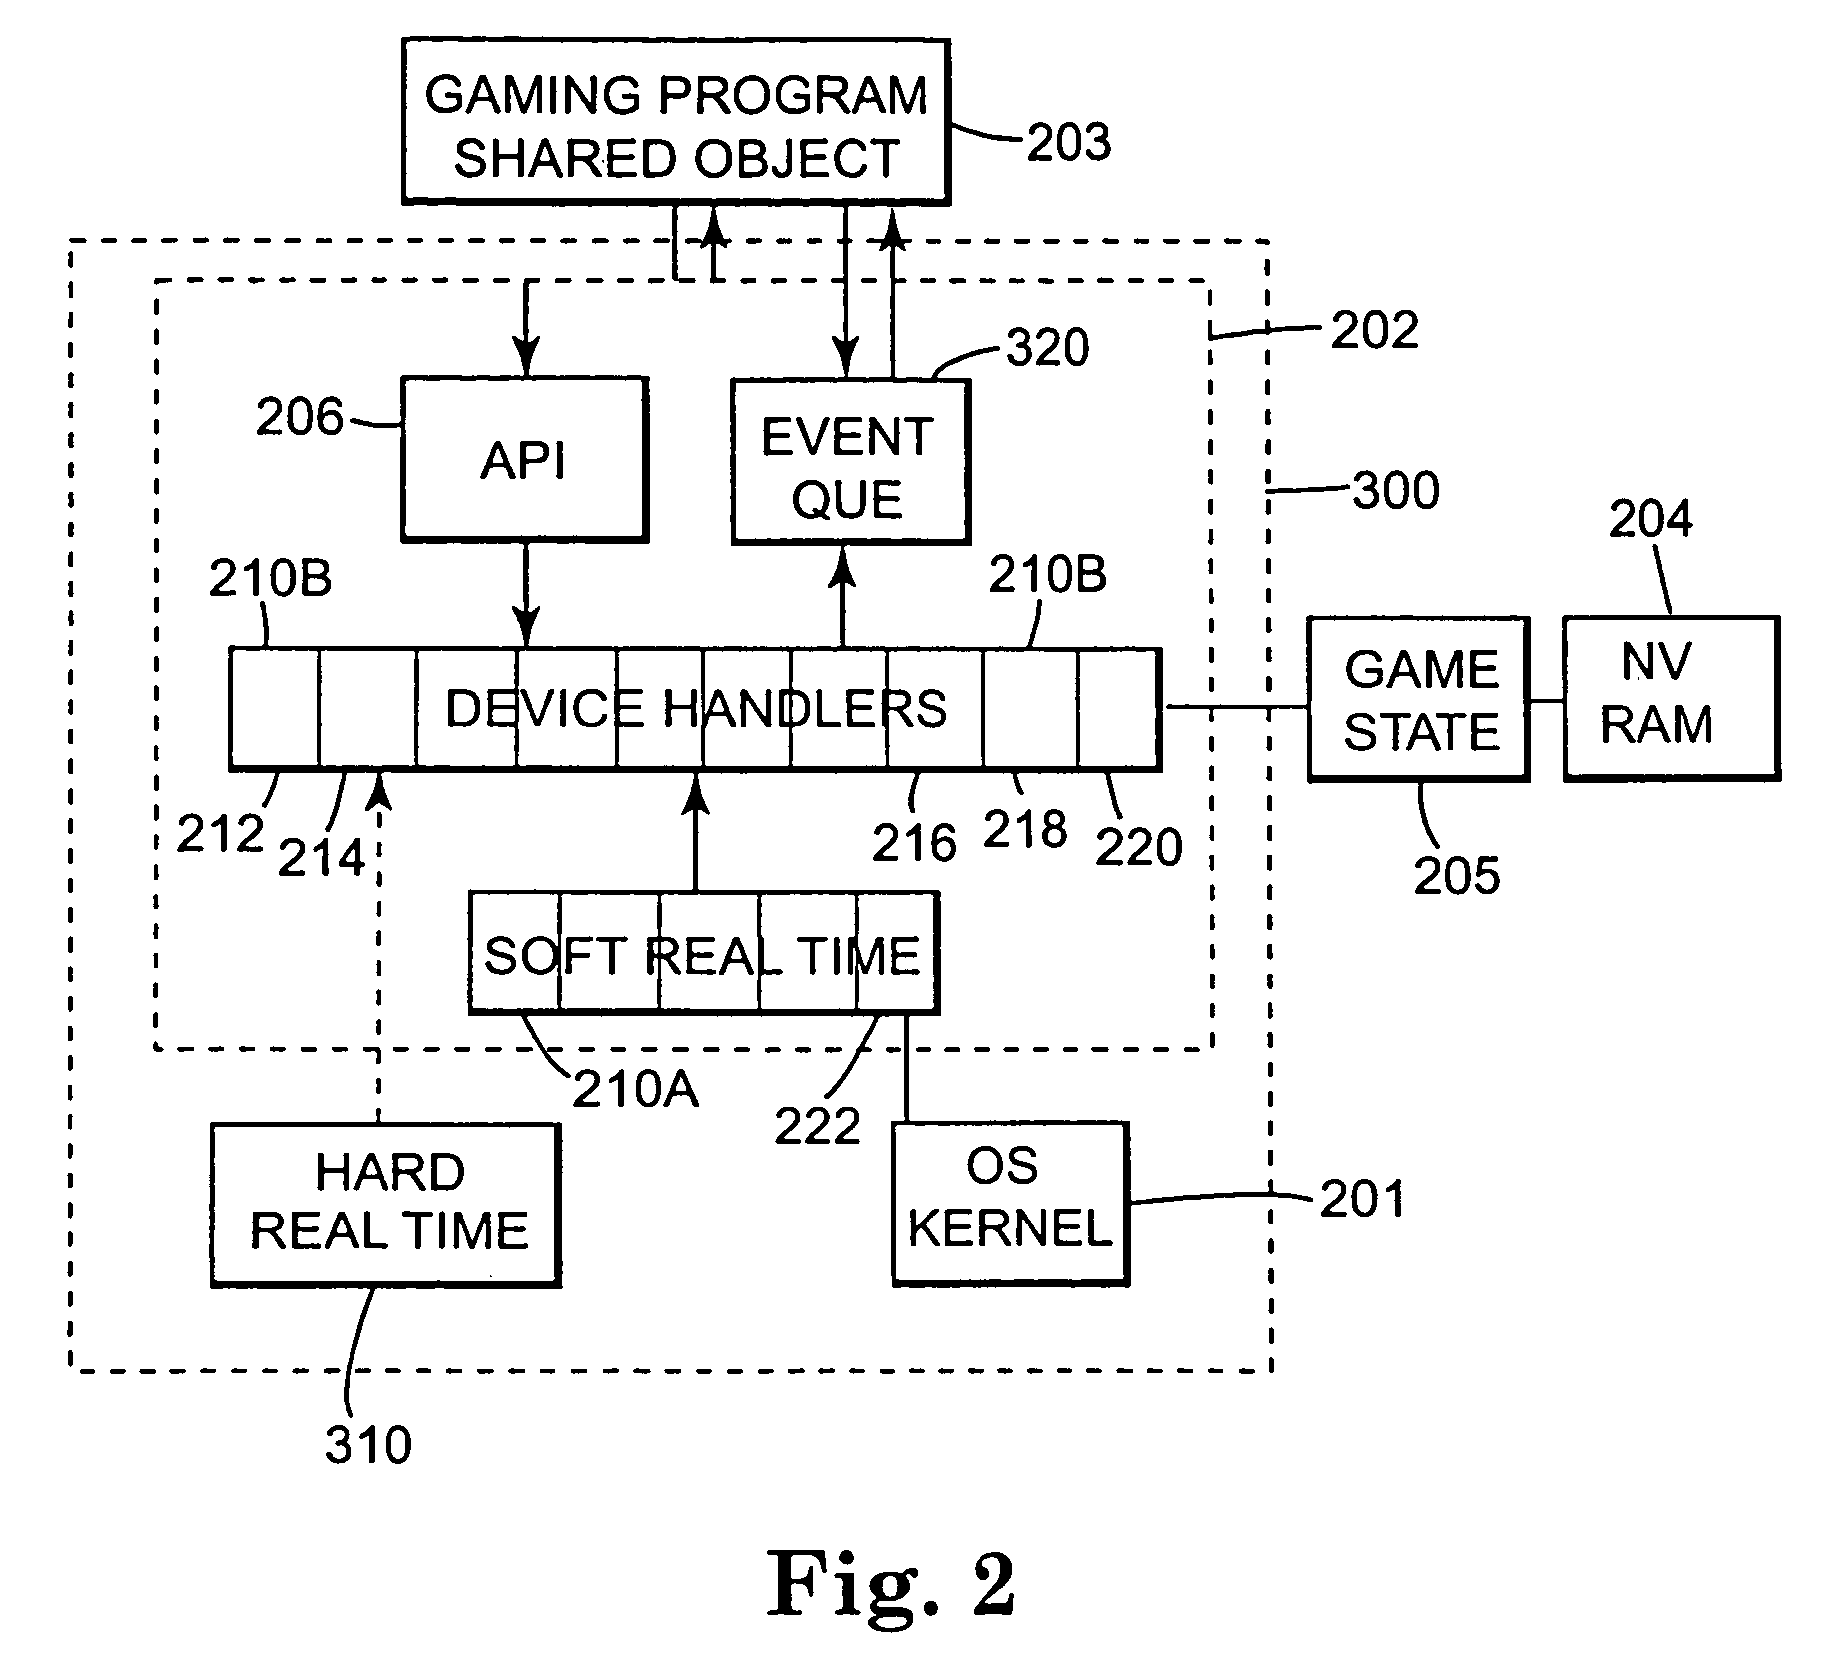 Computerized gaming system, method and apparatus